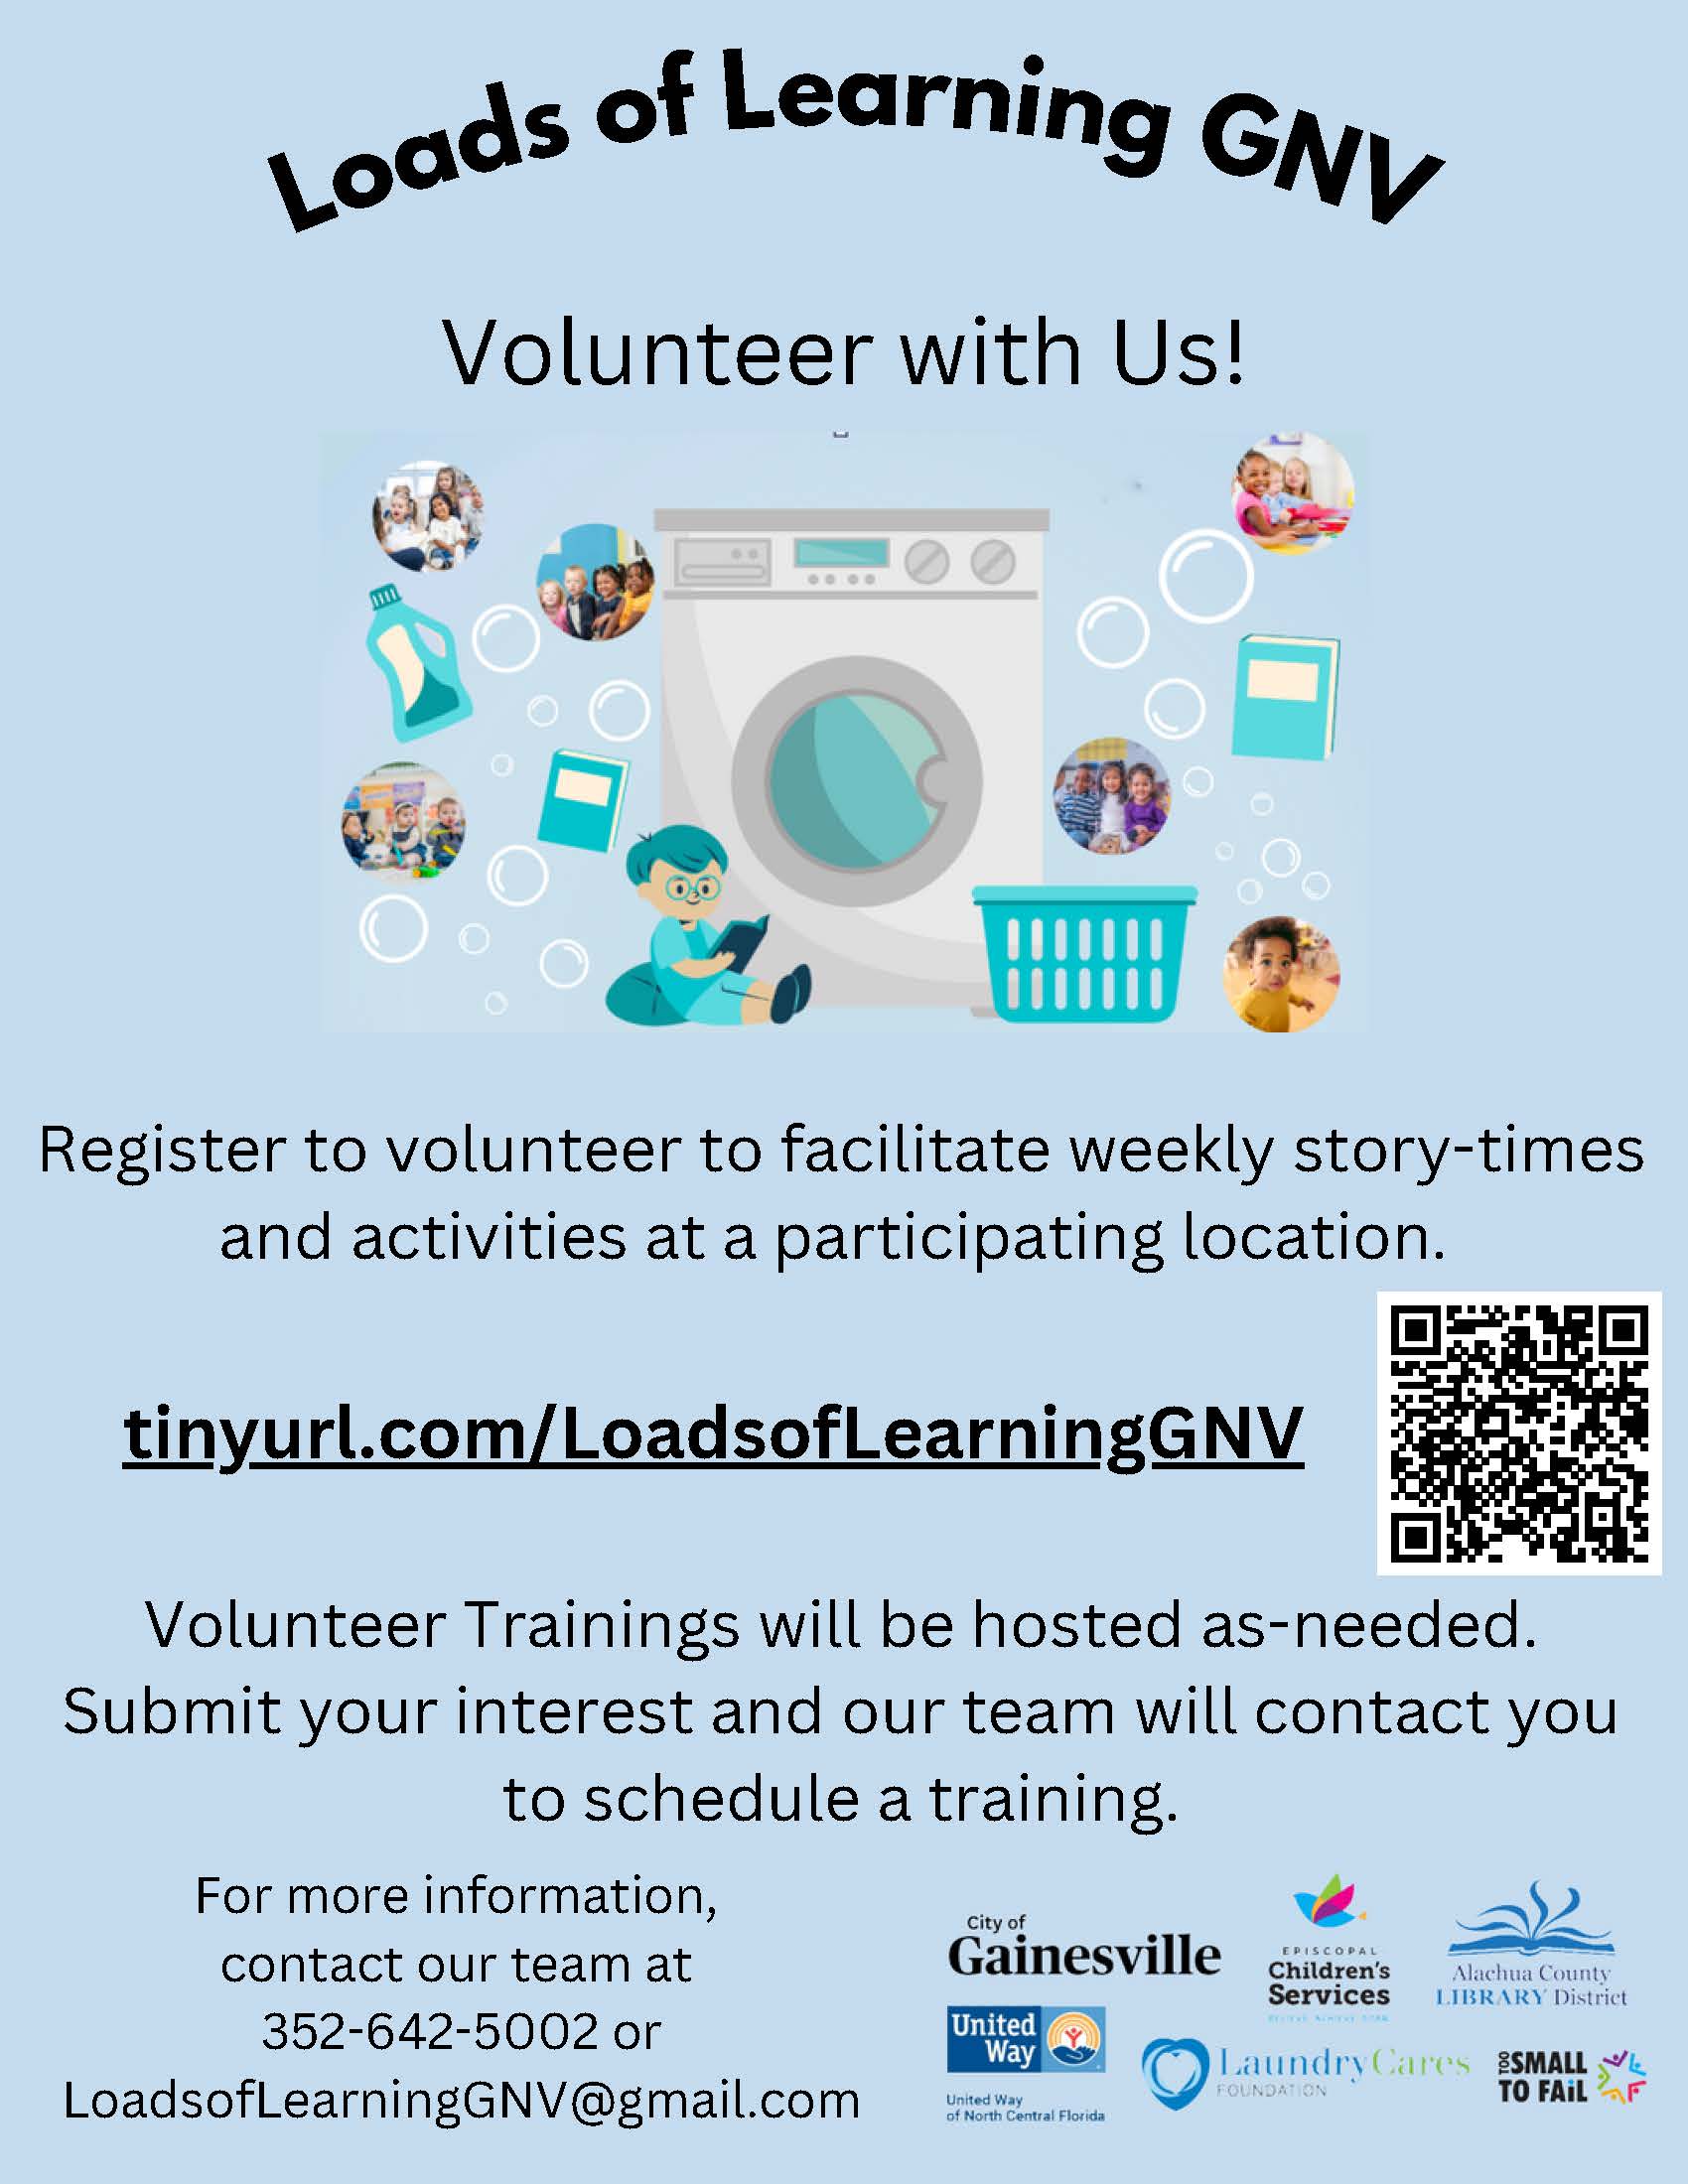 A flyer for the volunteering opportunity with a QR code on the center-right location on the flyer.